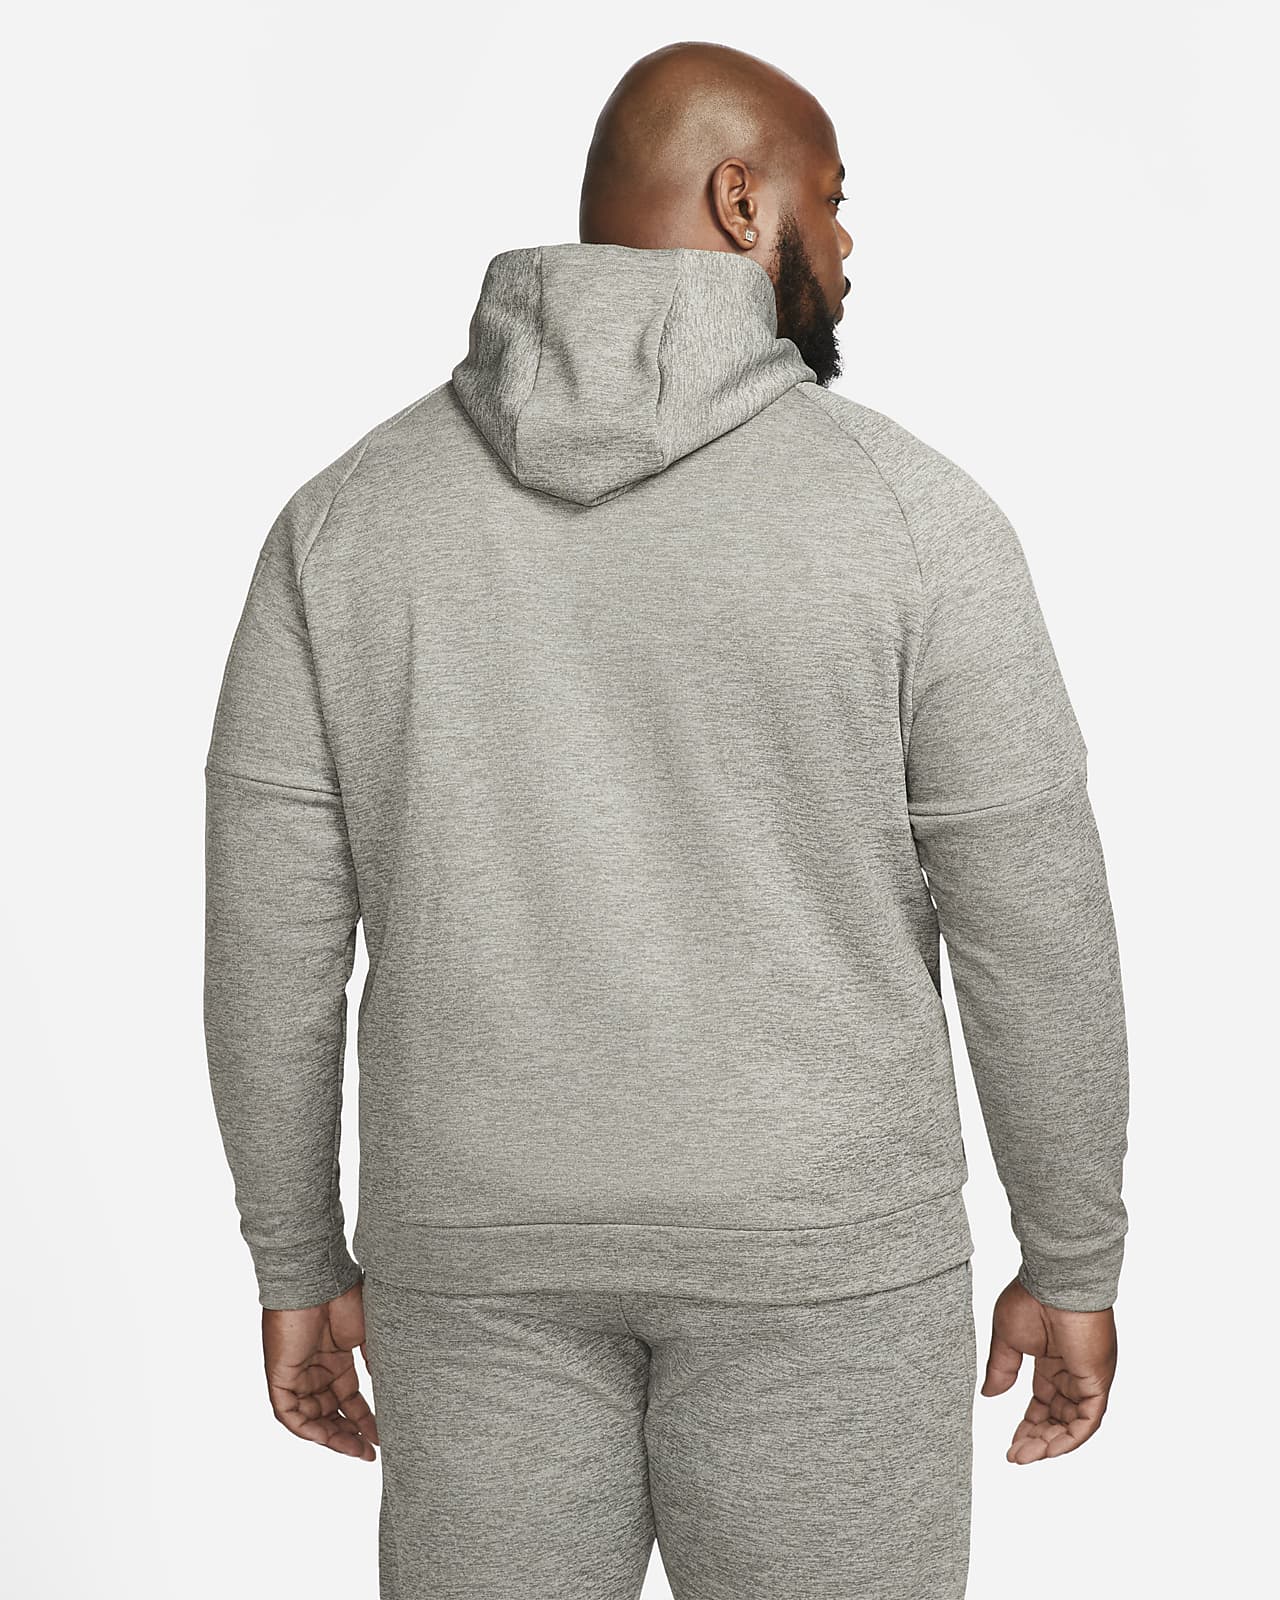 Walter Cunningham Paloma Carnicero Nike Therma-FIT Men's Pullover Fitness Hoodie. Nike.com